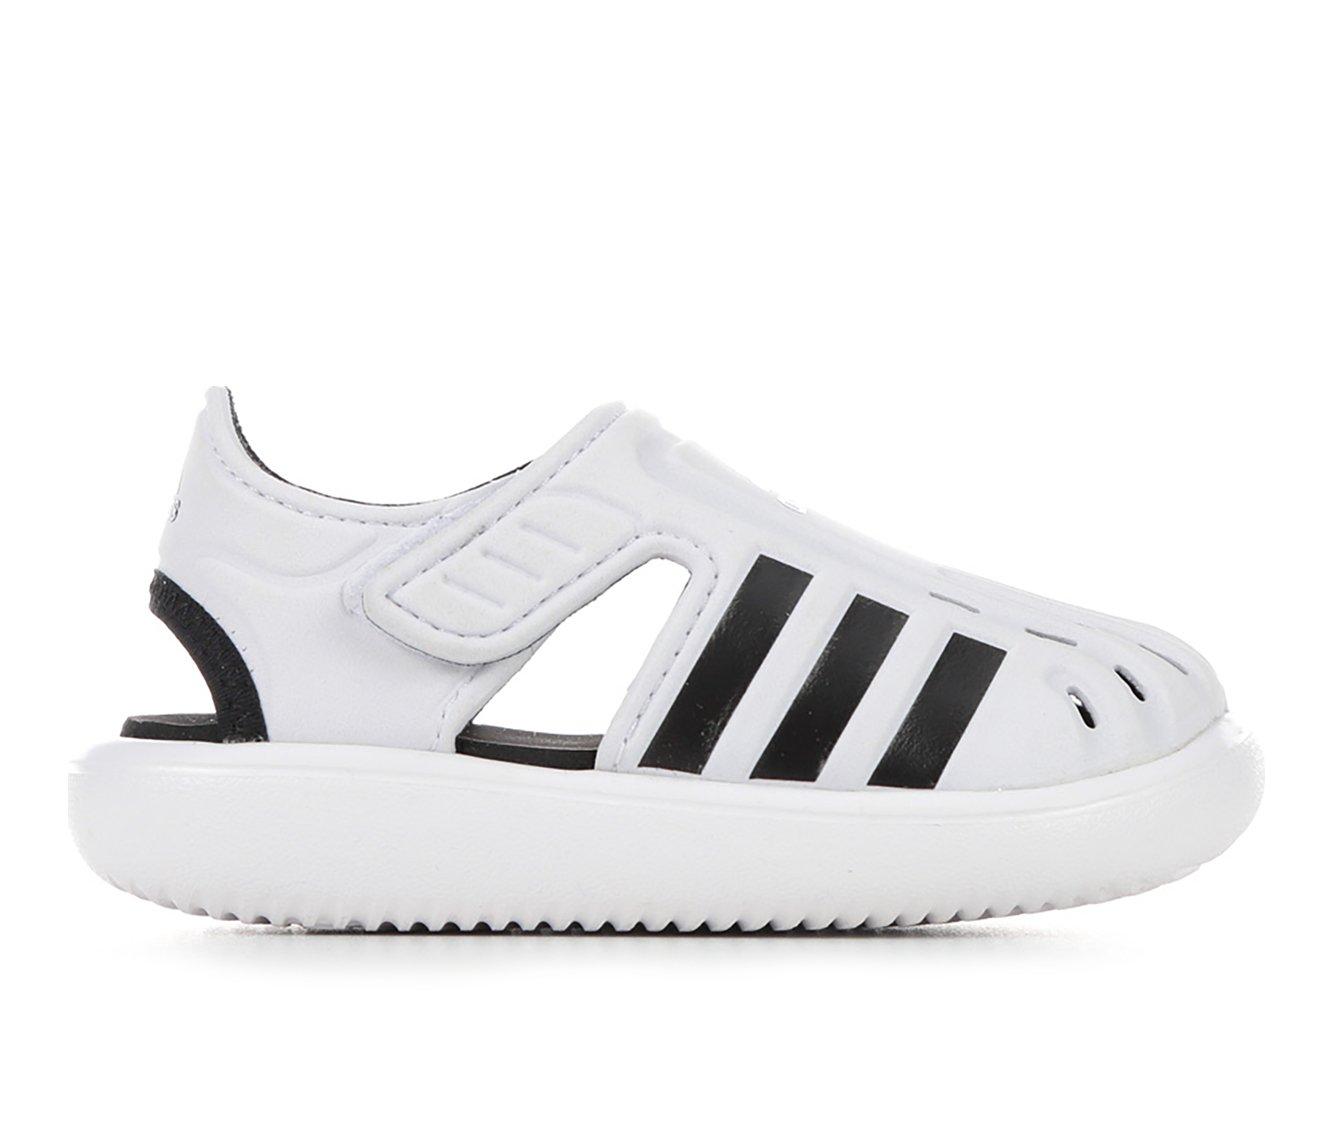 Boys' Adidas Infant & Toddler Closed Toe Water Sandals